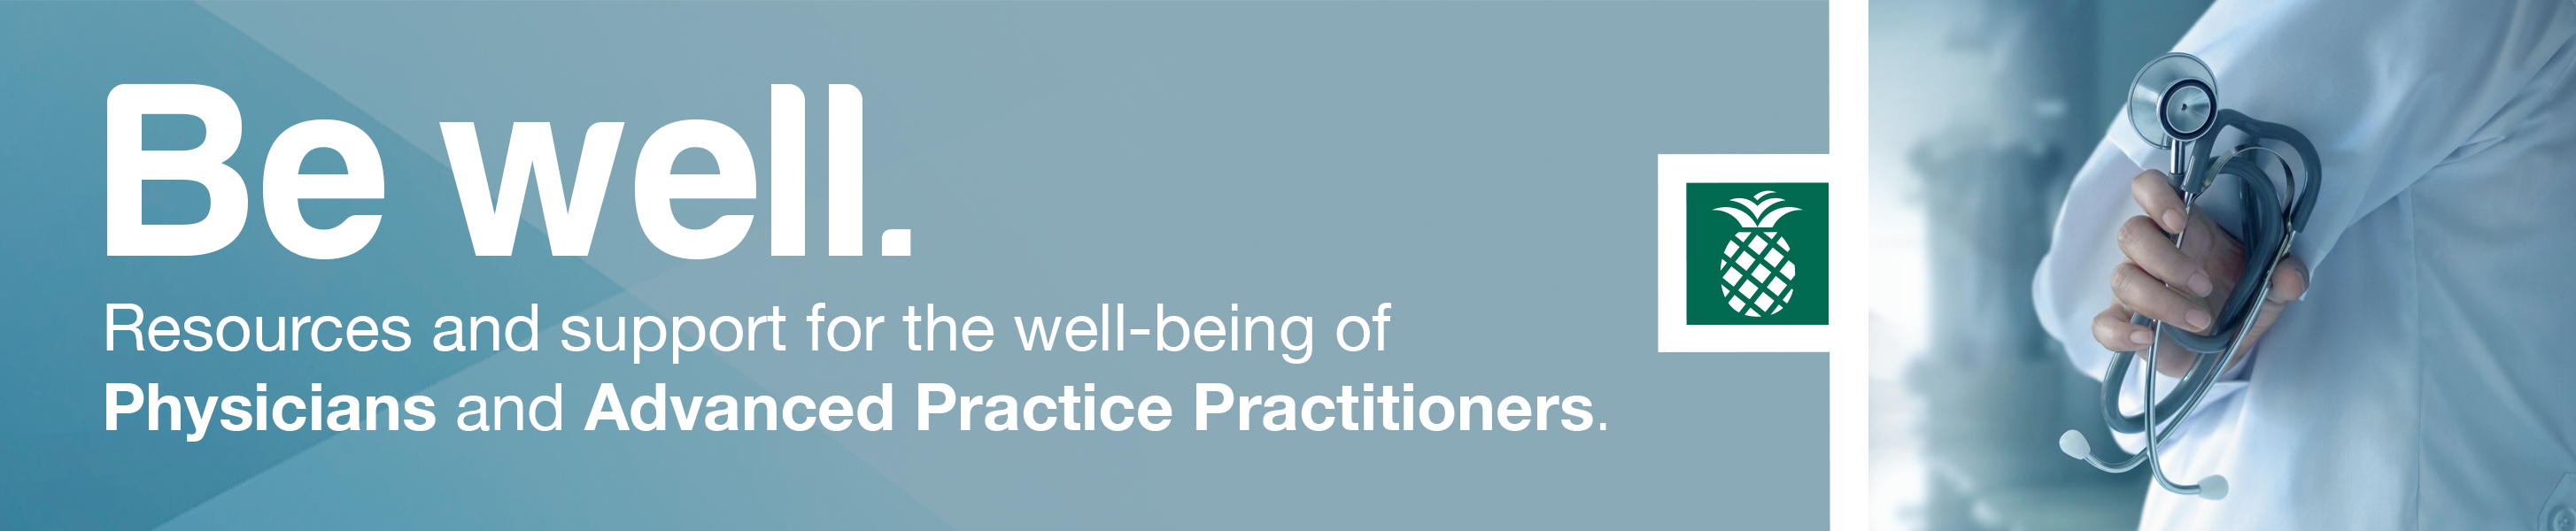 Physician and Advanced Practice Practitioner - BE WELL